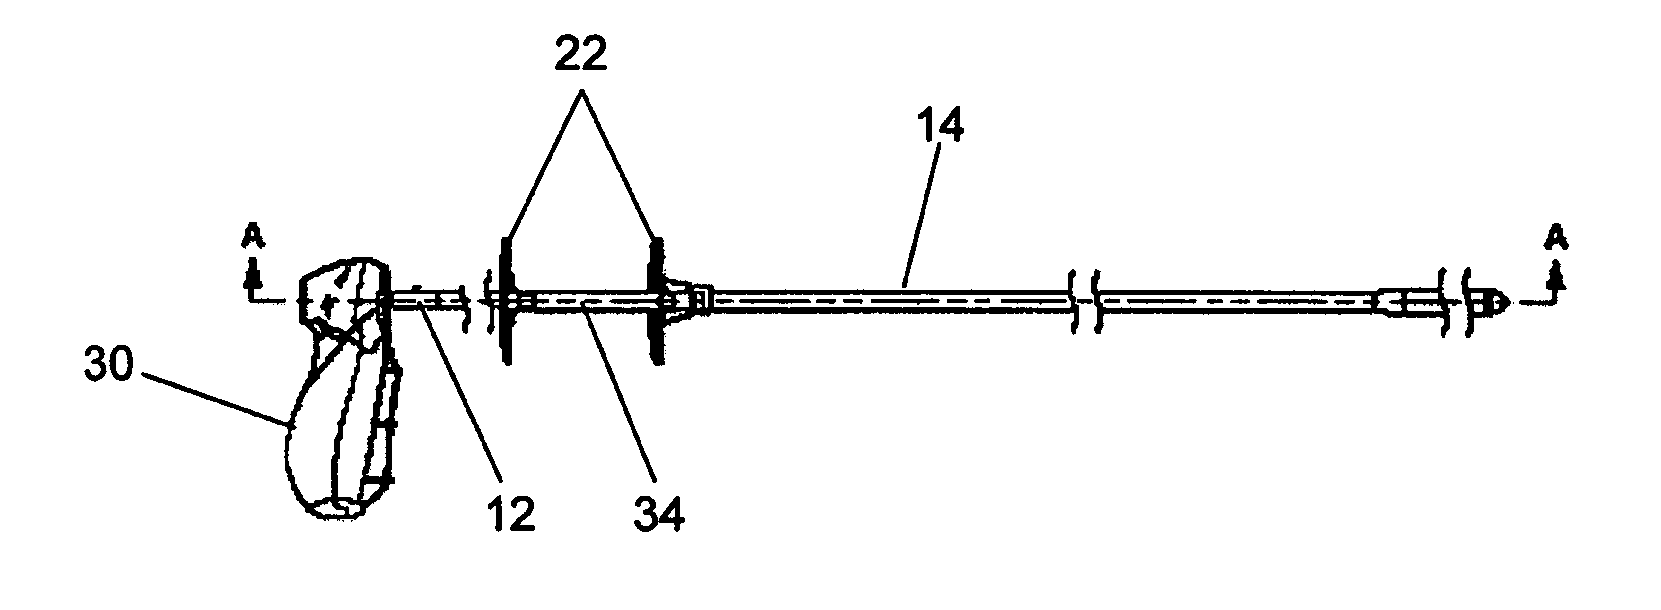 Delivery device with anchoring features and associated method